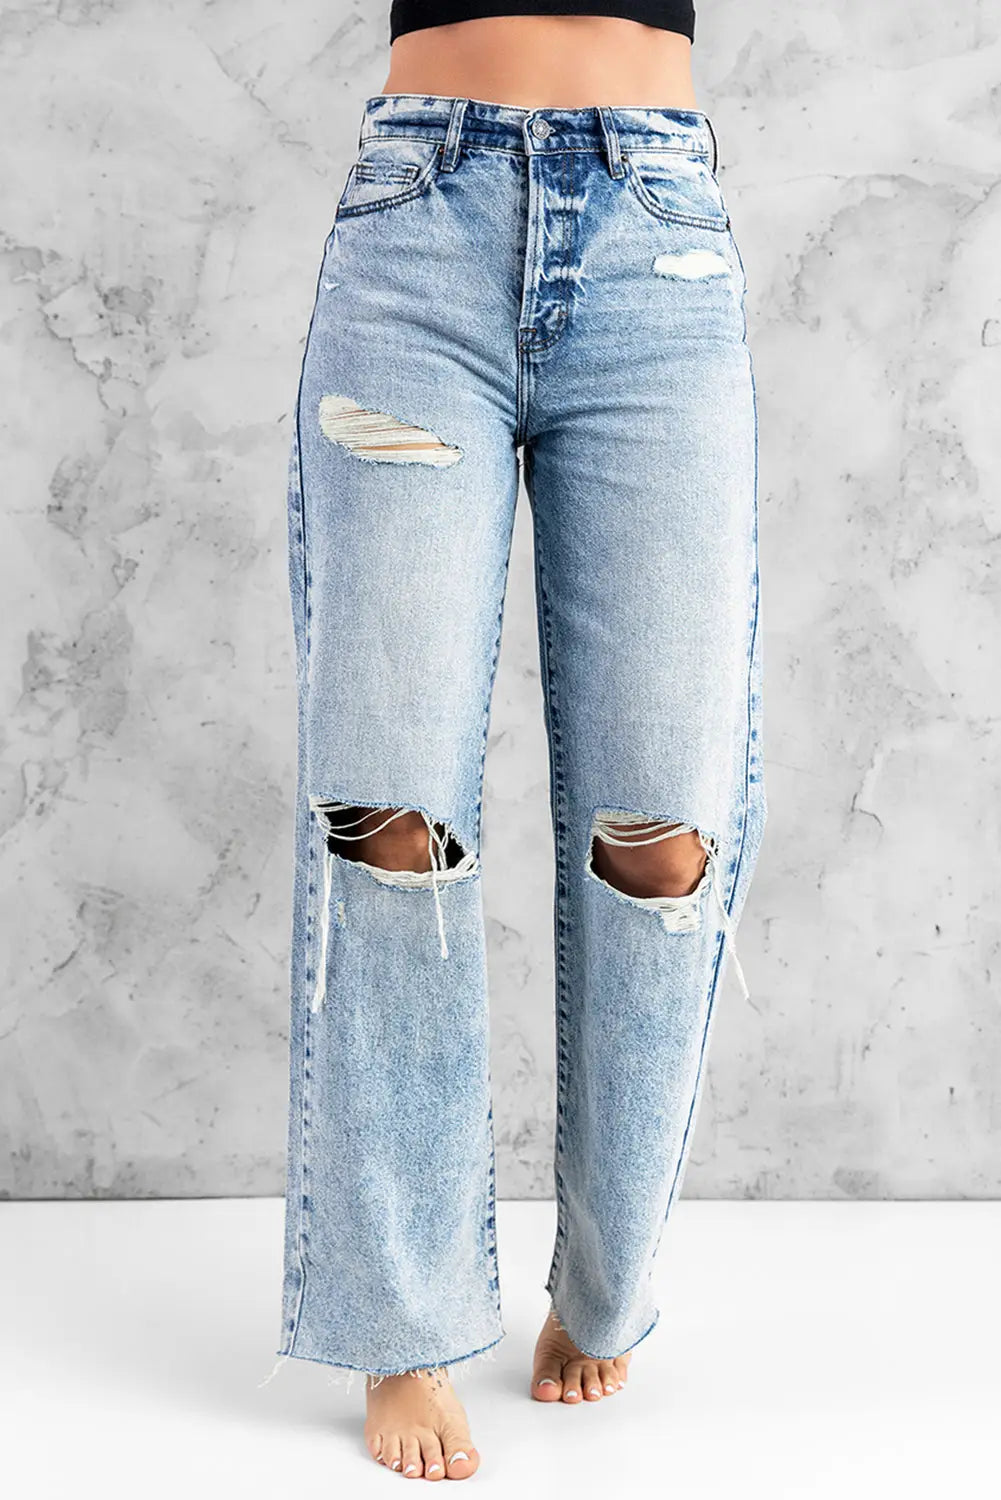 Sky blue distressed hollow-out knees wide leg jeans - s